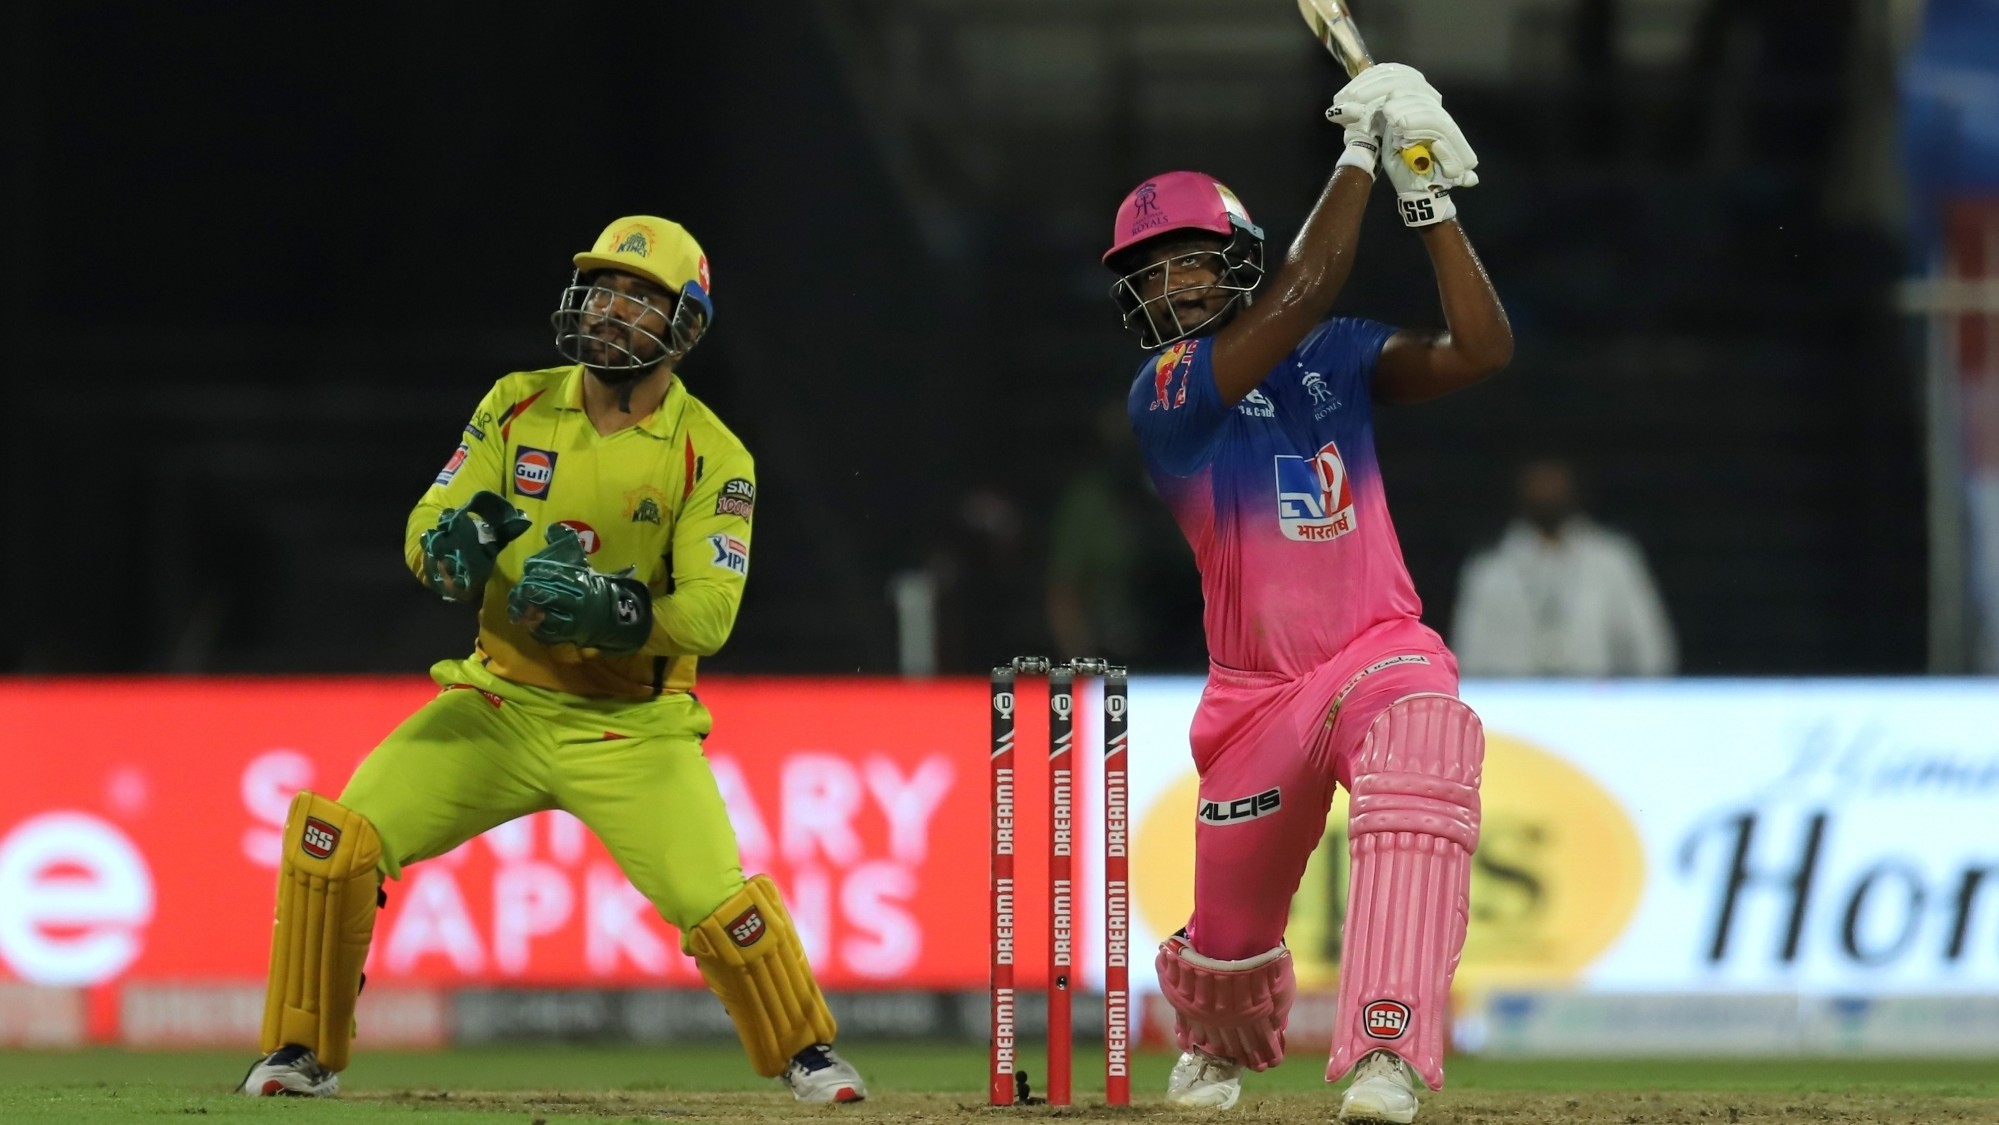 IPL 2020: ‘No one can and no one should try to play like him’, Samson rejects comparisons with Dhoni